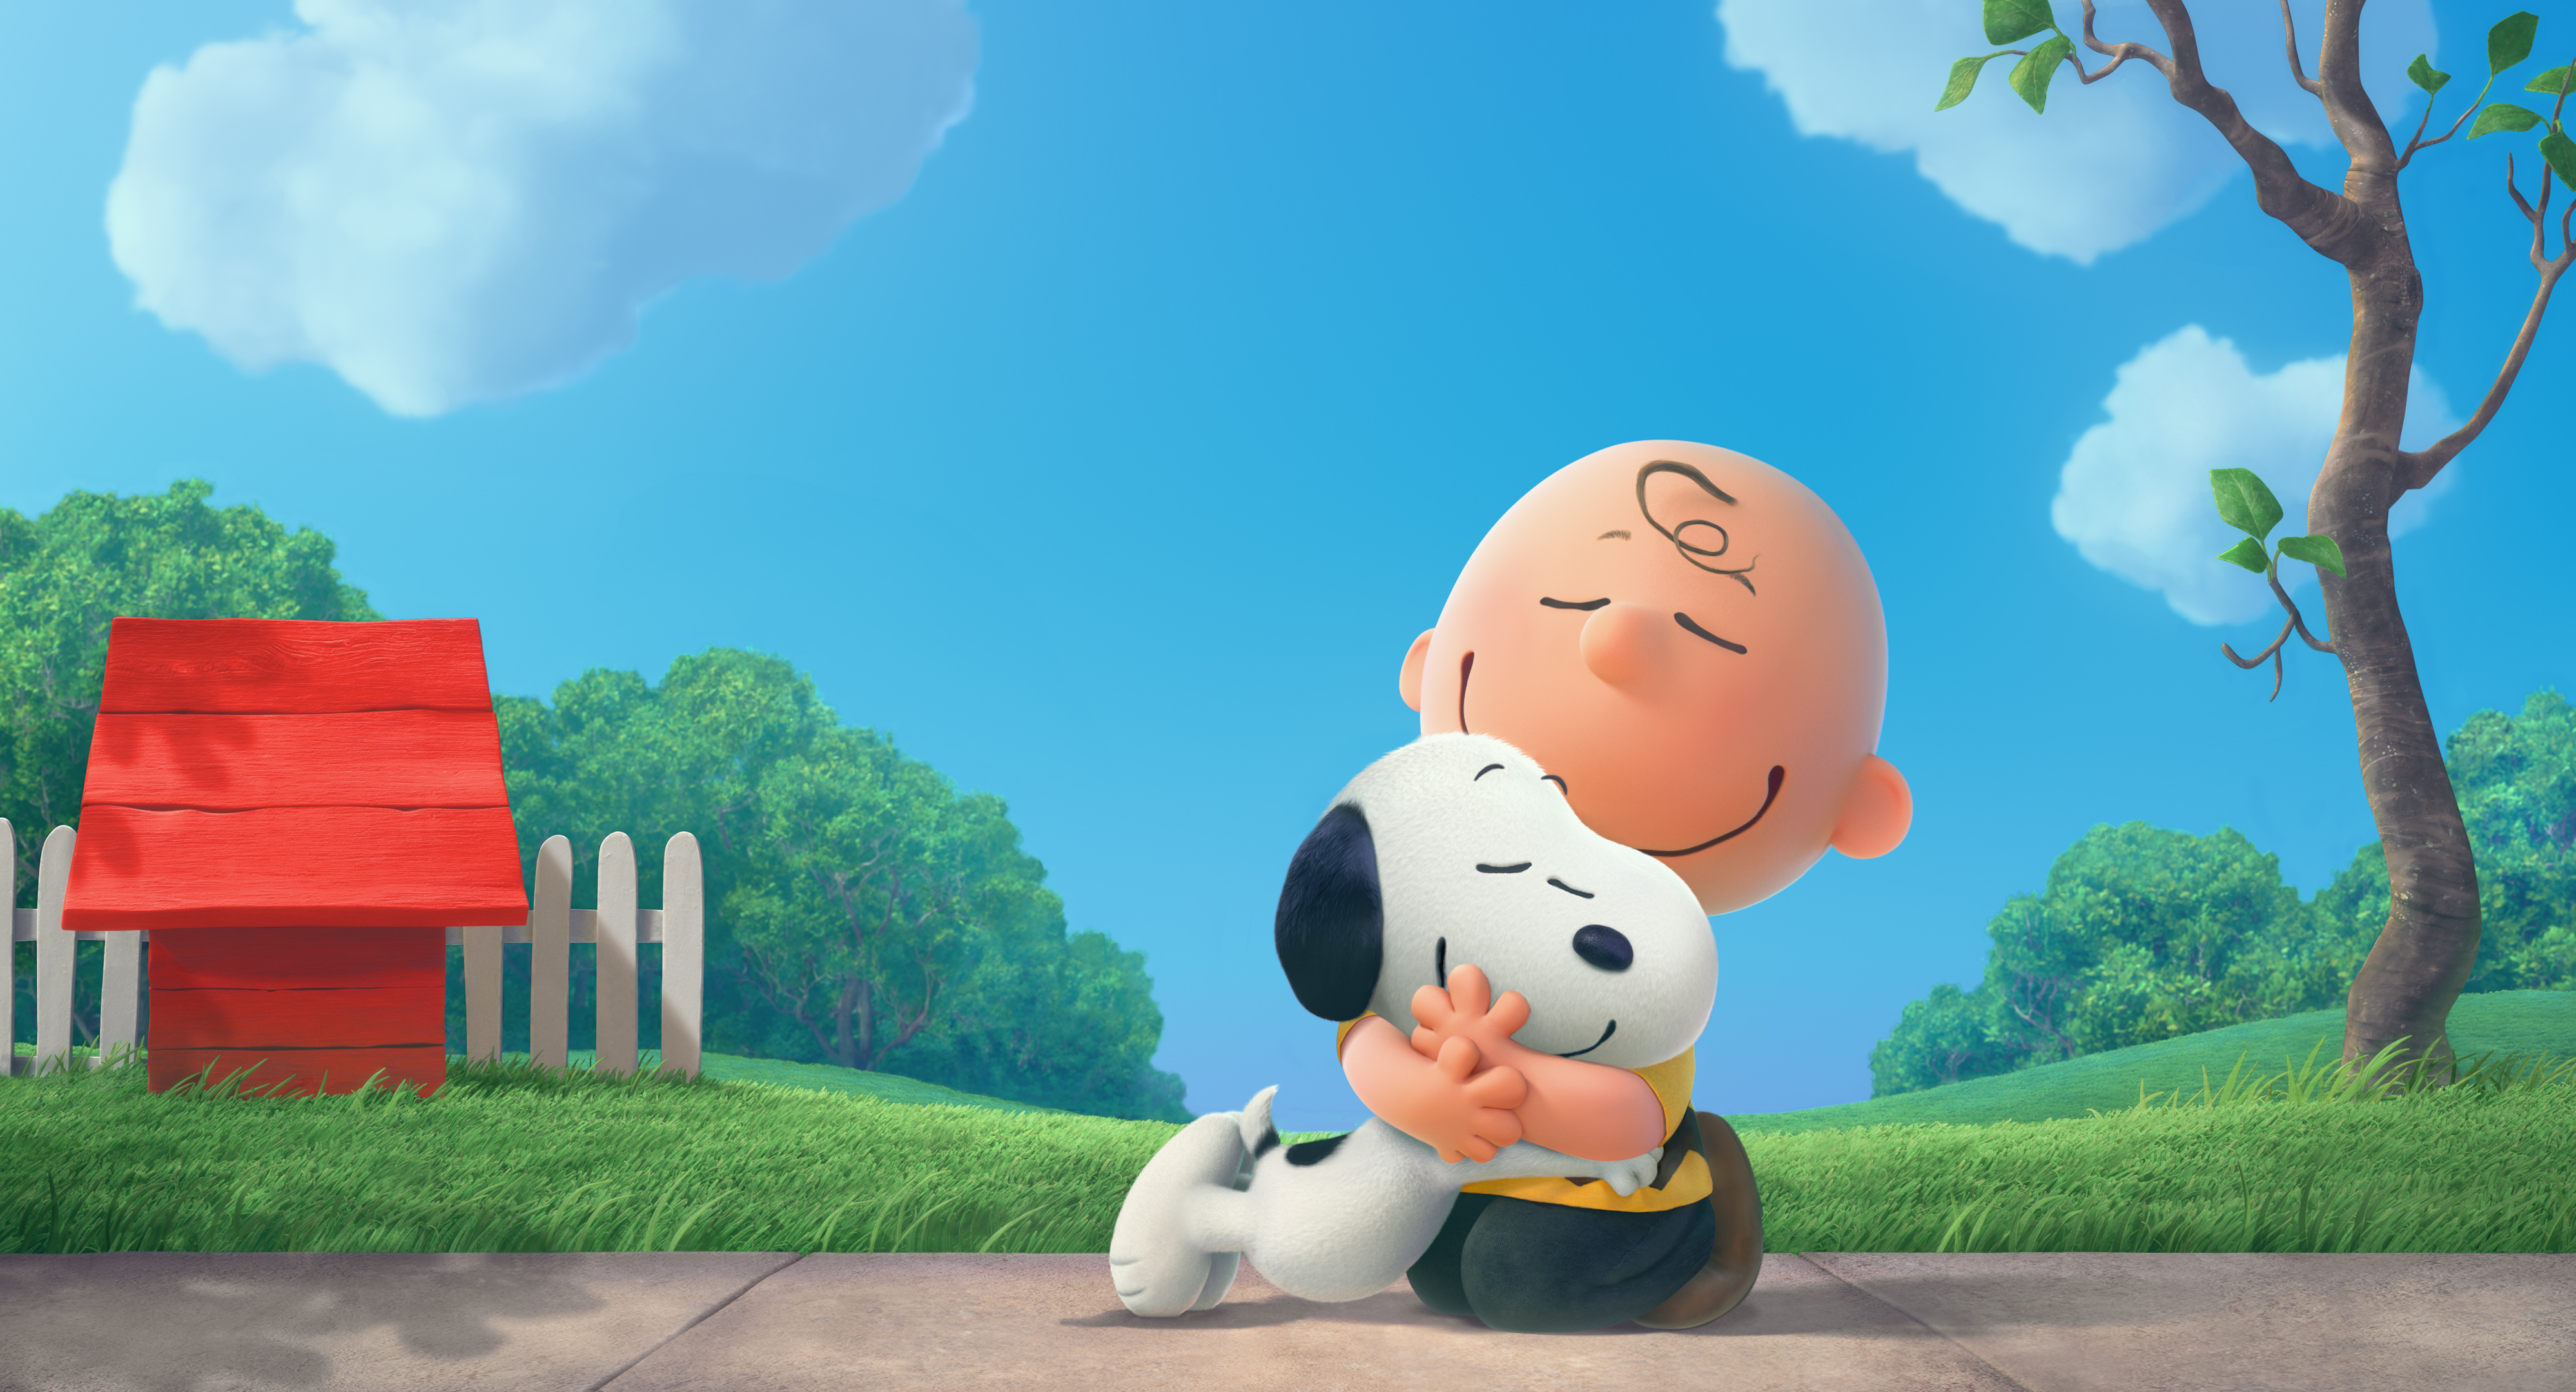 Charlie Brown Snoopy The Peanuts The Peanuts Movie 3996x2160